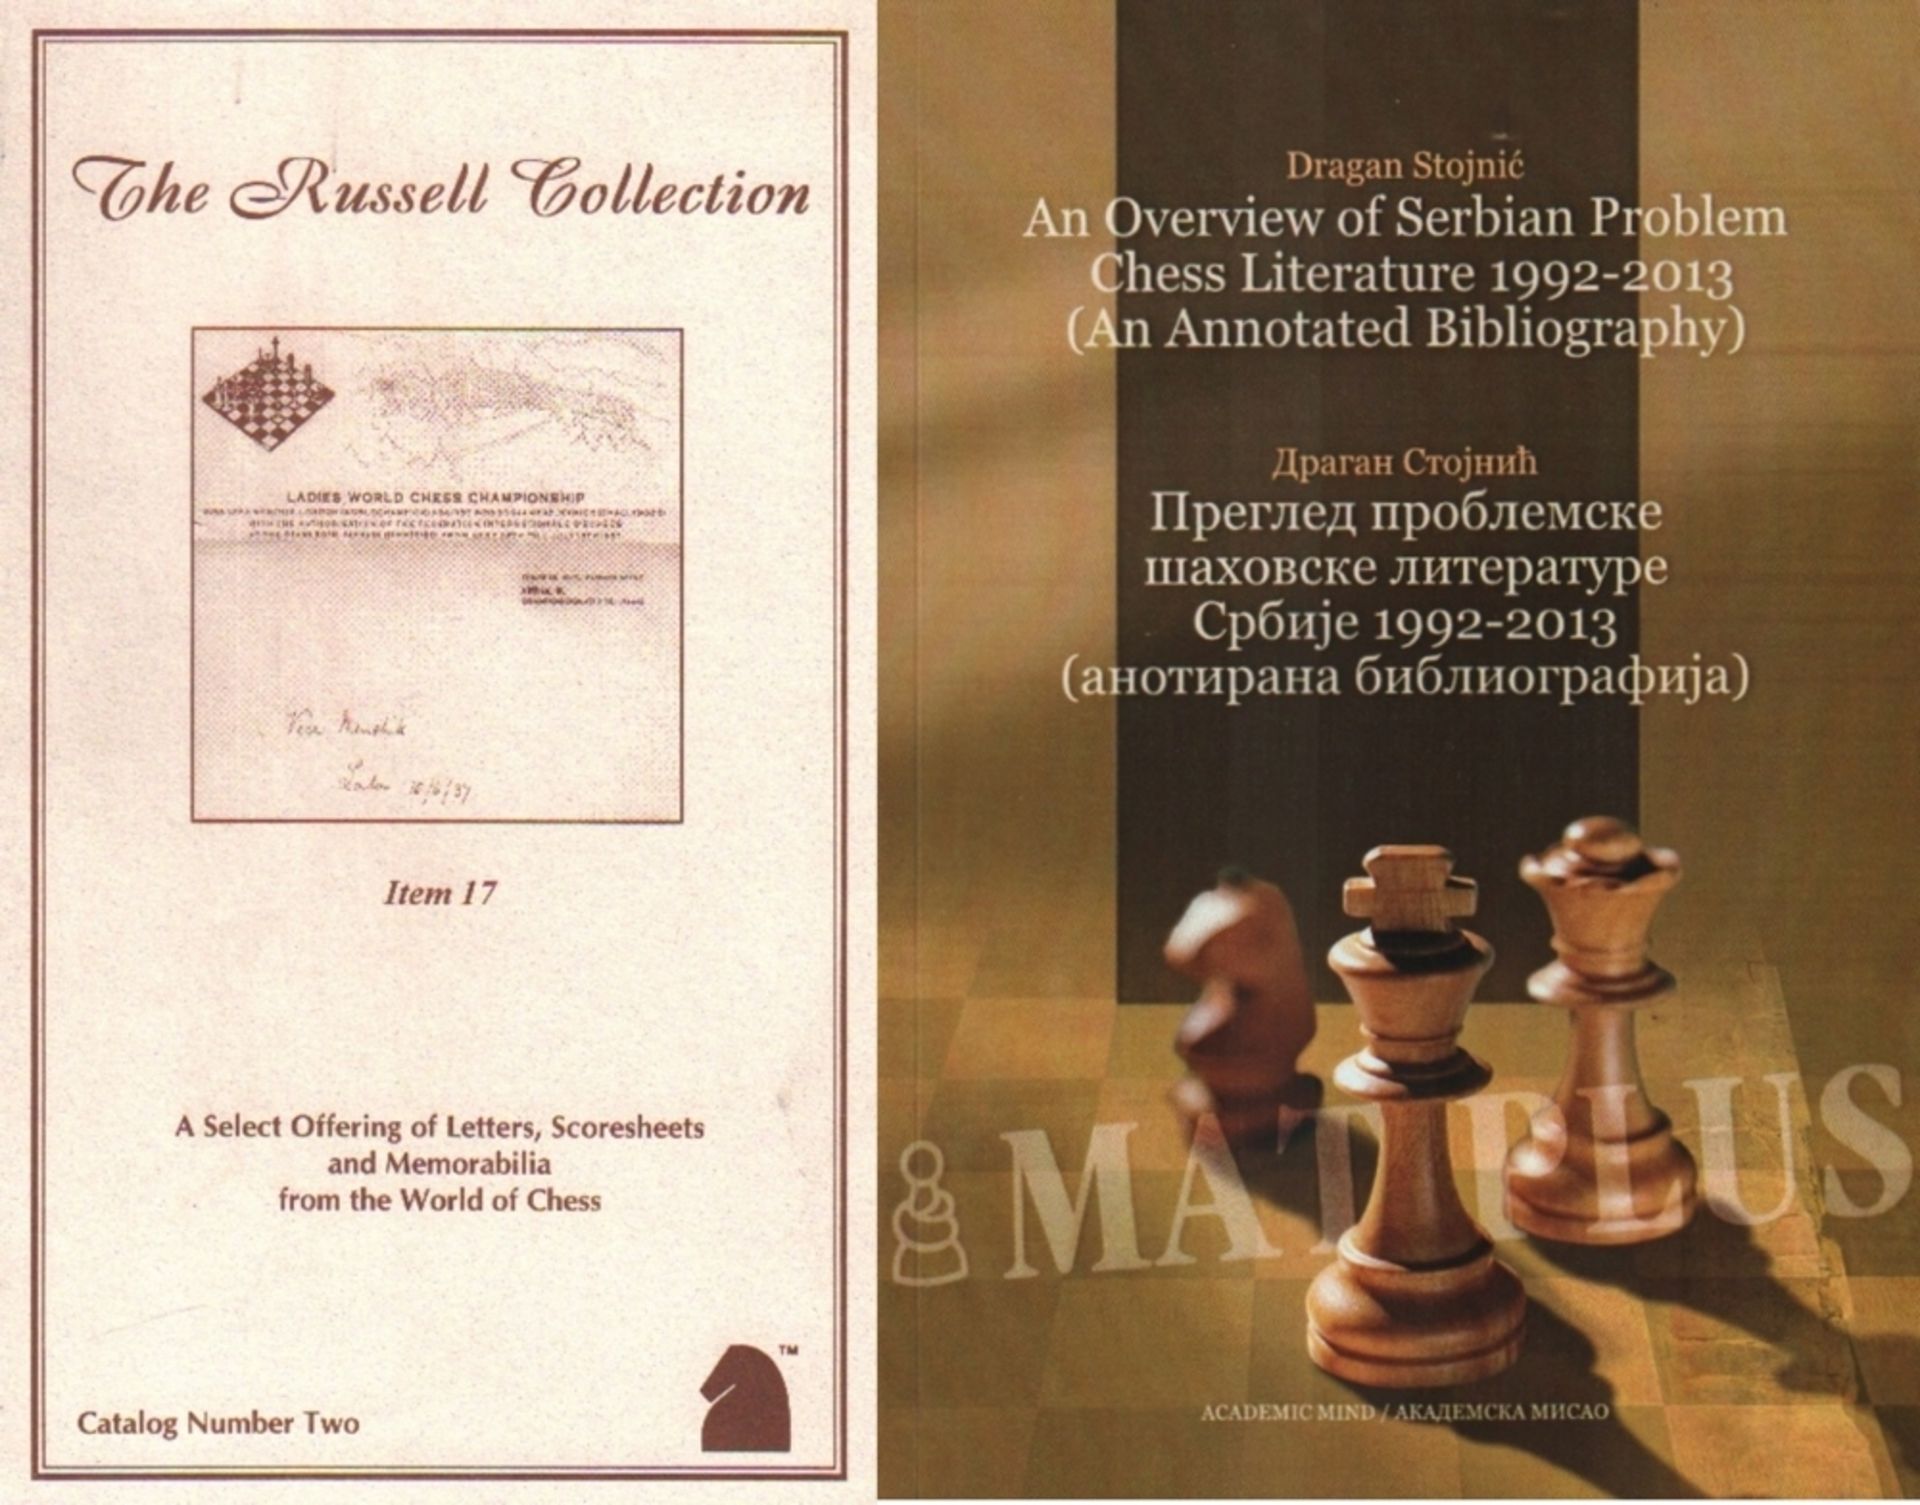 The Russel Collection. A select Offering of Letters, Scoresheets and Memorabilia from the World of